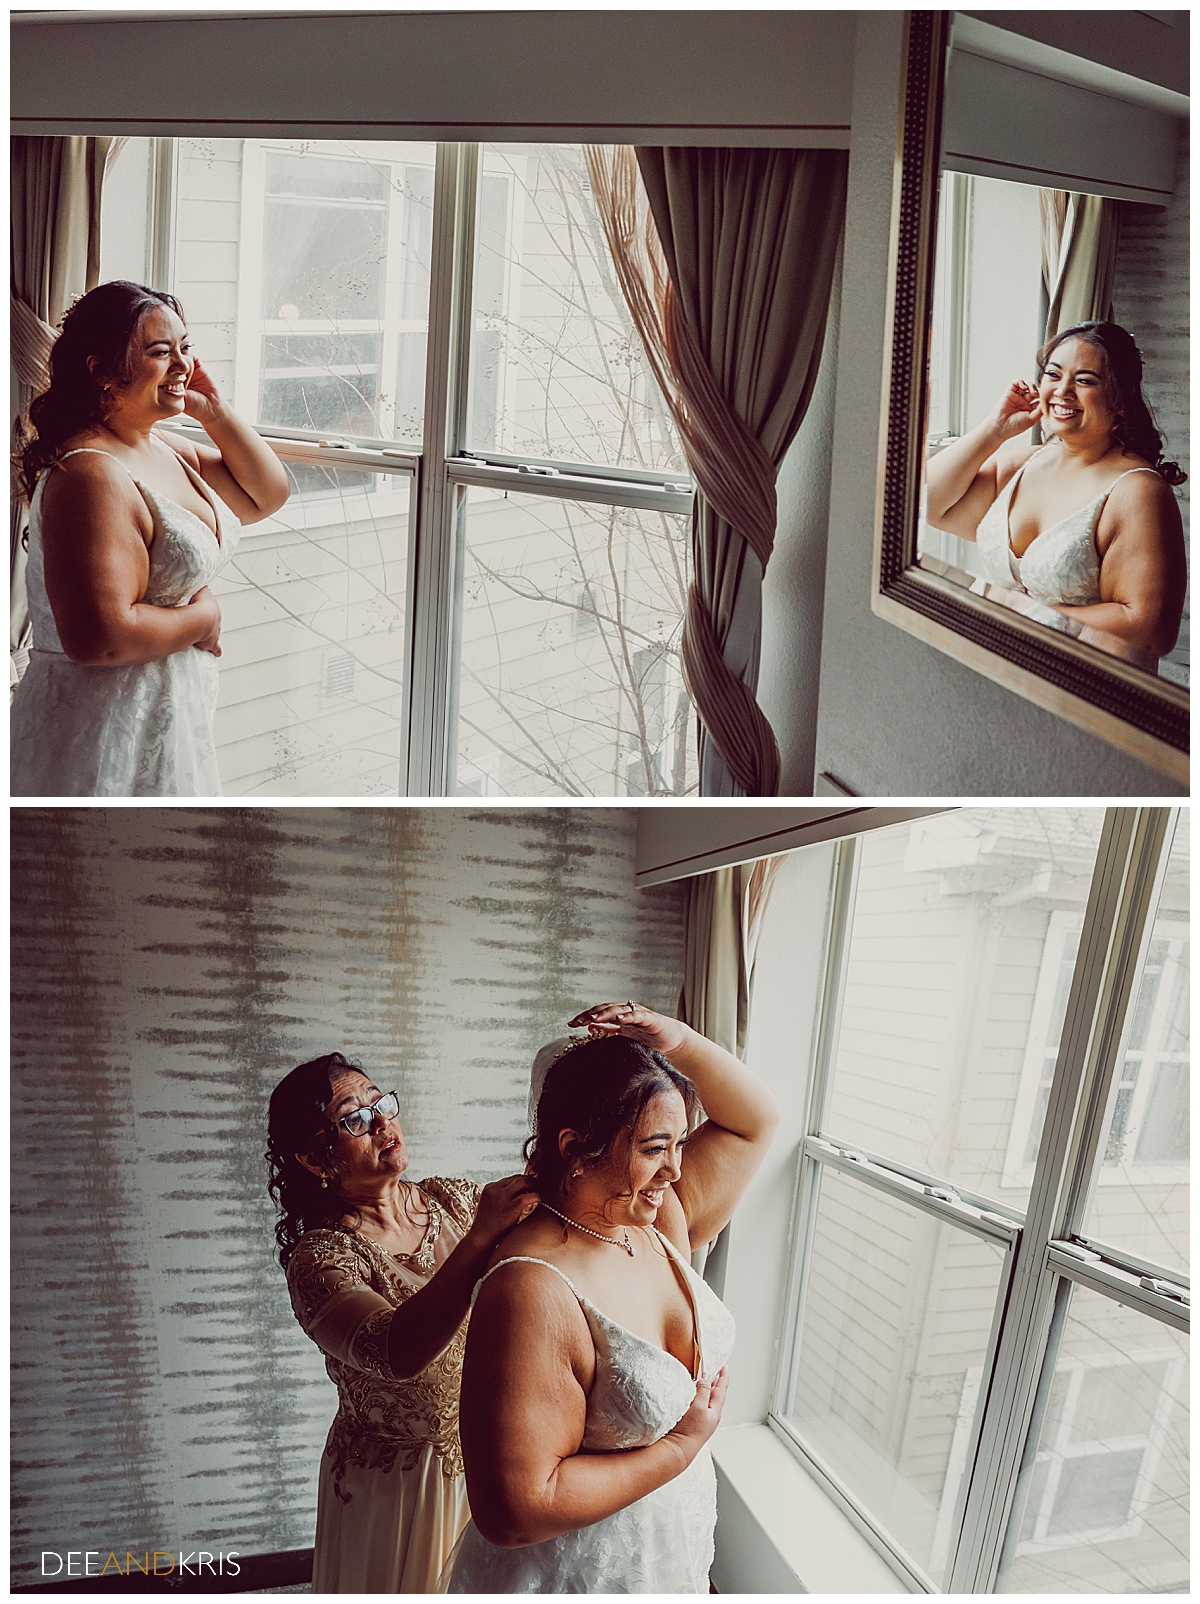 Two images: Top image of bride in mirror putting on earrings. Bottom image of mother-of-bride helping bride put on her necklace in front of a window.